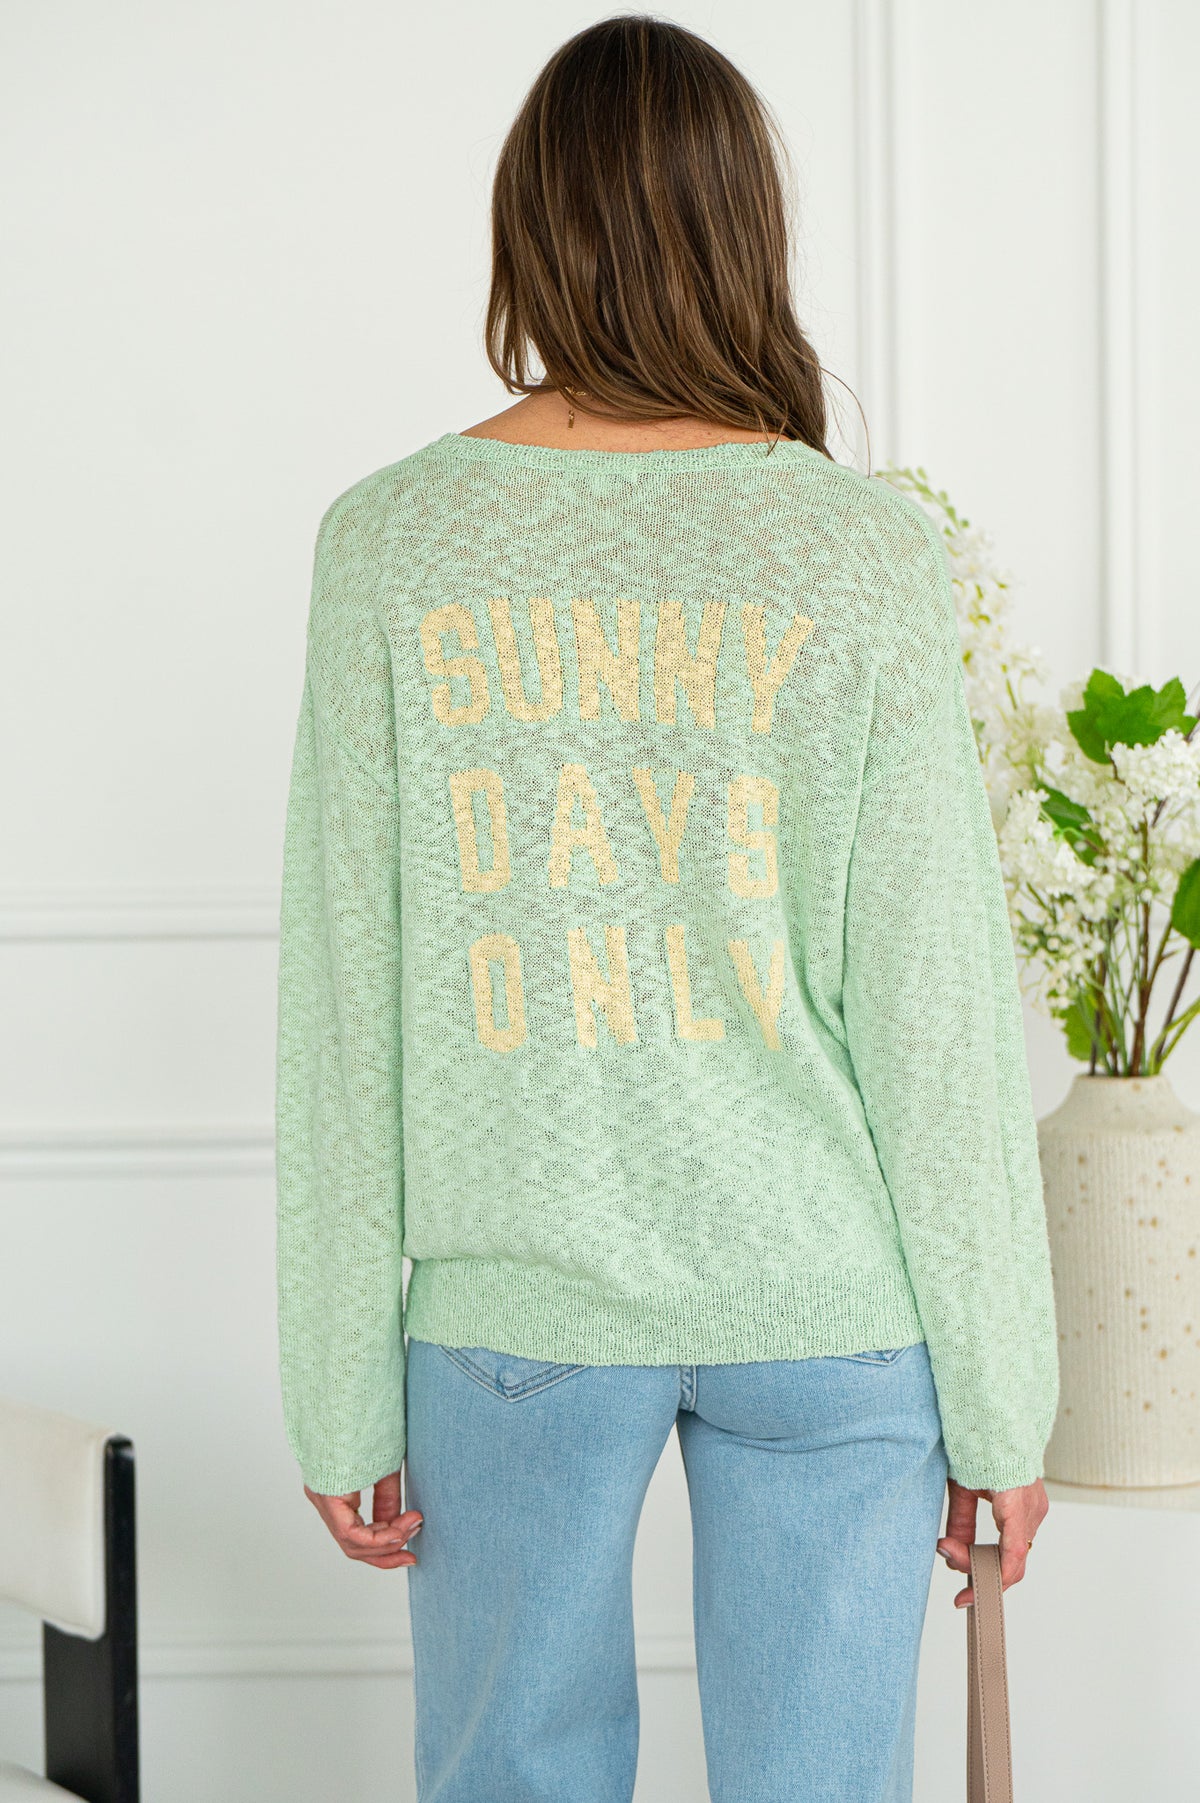 SUNNY DAYS ONLY SWEATER